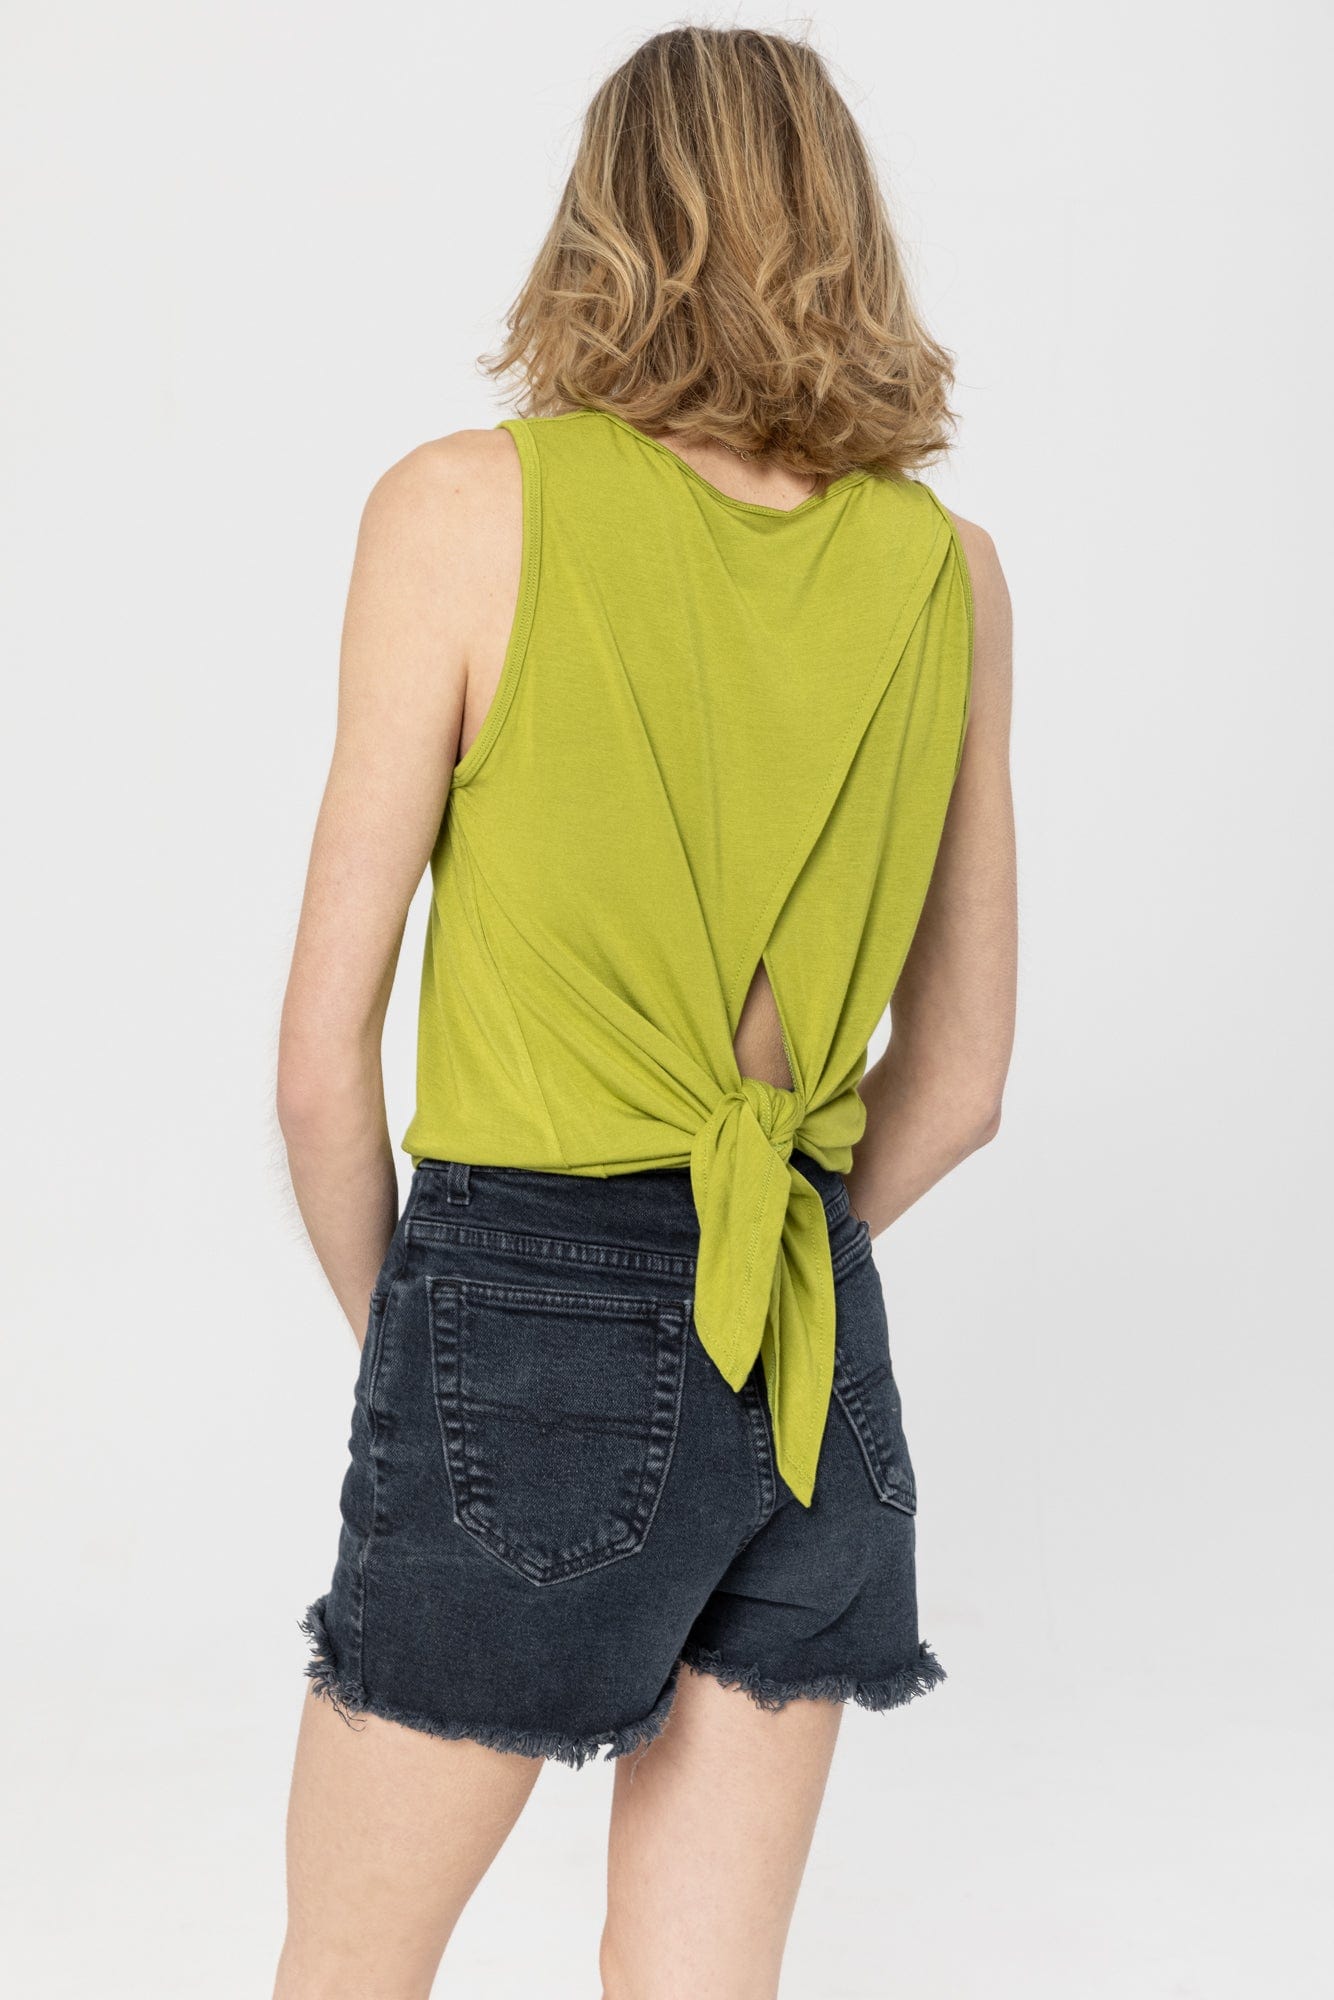 New Mexico Camisole - Olive 